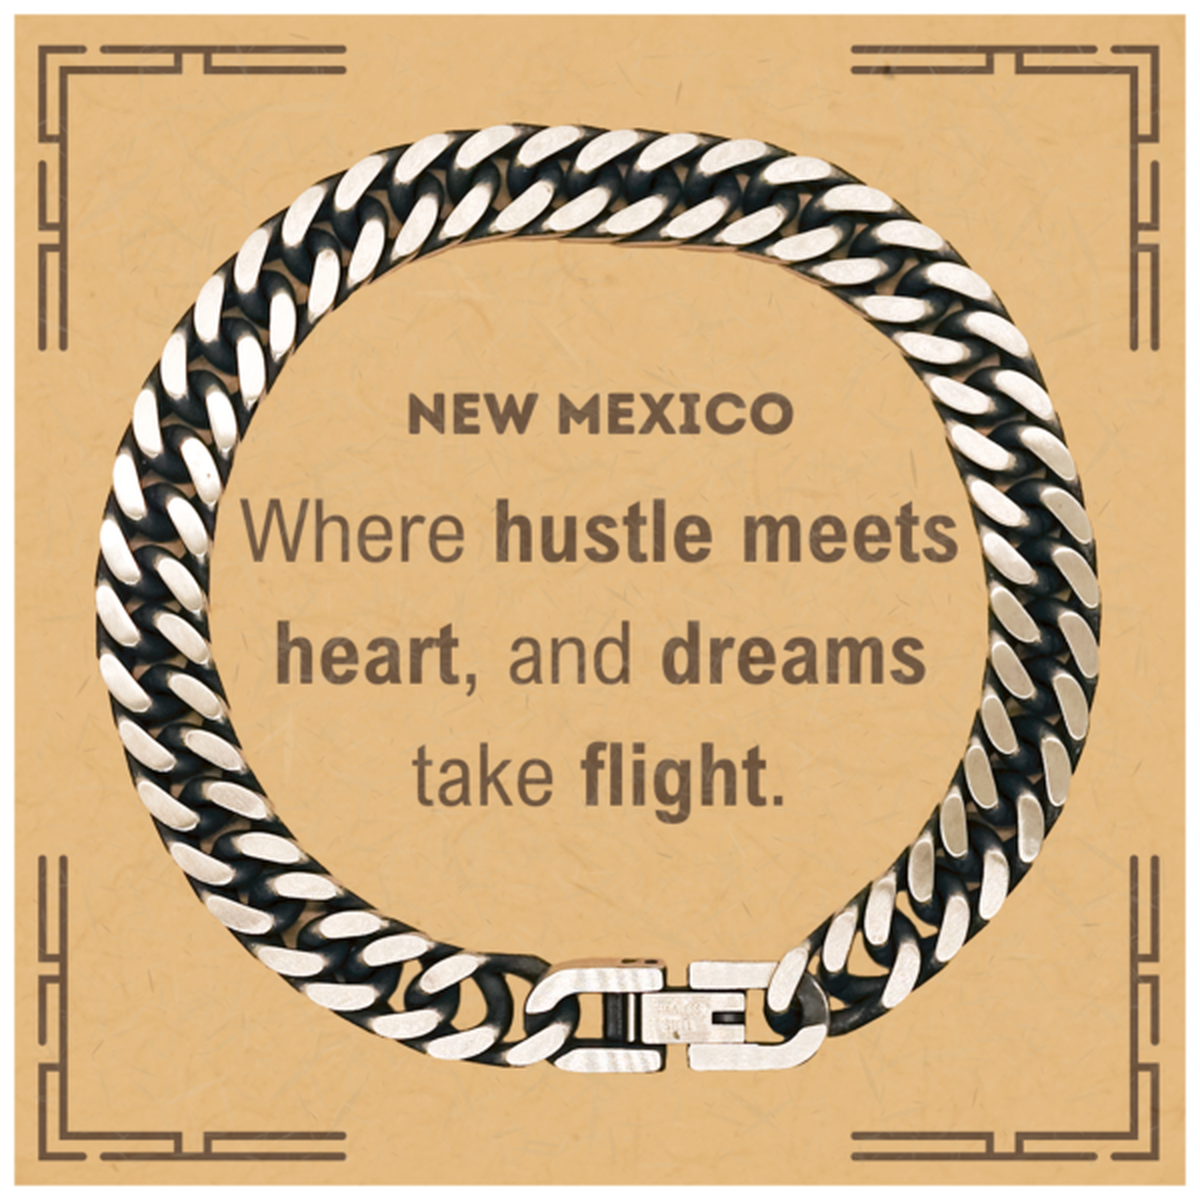 New Mexico: Where hustle meets heart, and dreams take flight, New Mexico Card Gifts, Proud New Mexico Christmas Birthday New Mexico Cuban Link Chain Bracelet, New Mexico State People, Men, Women, Friends